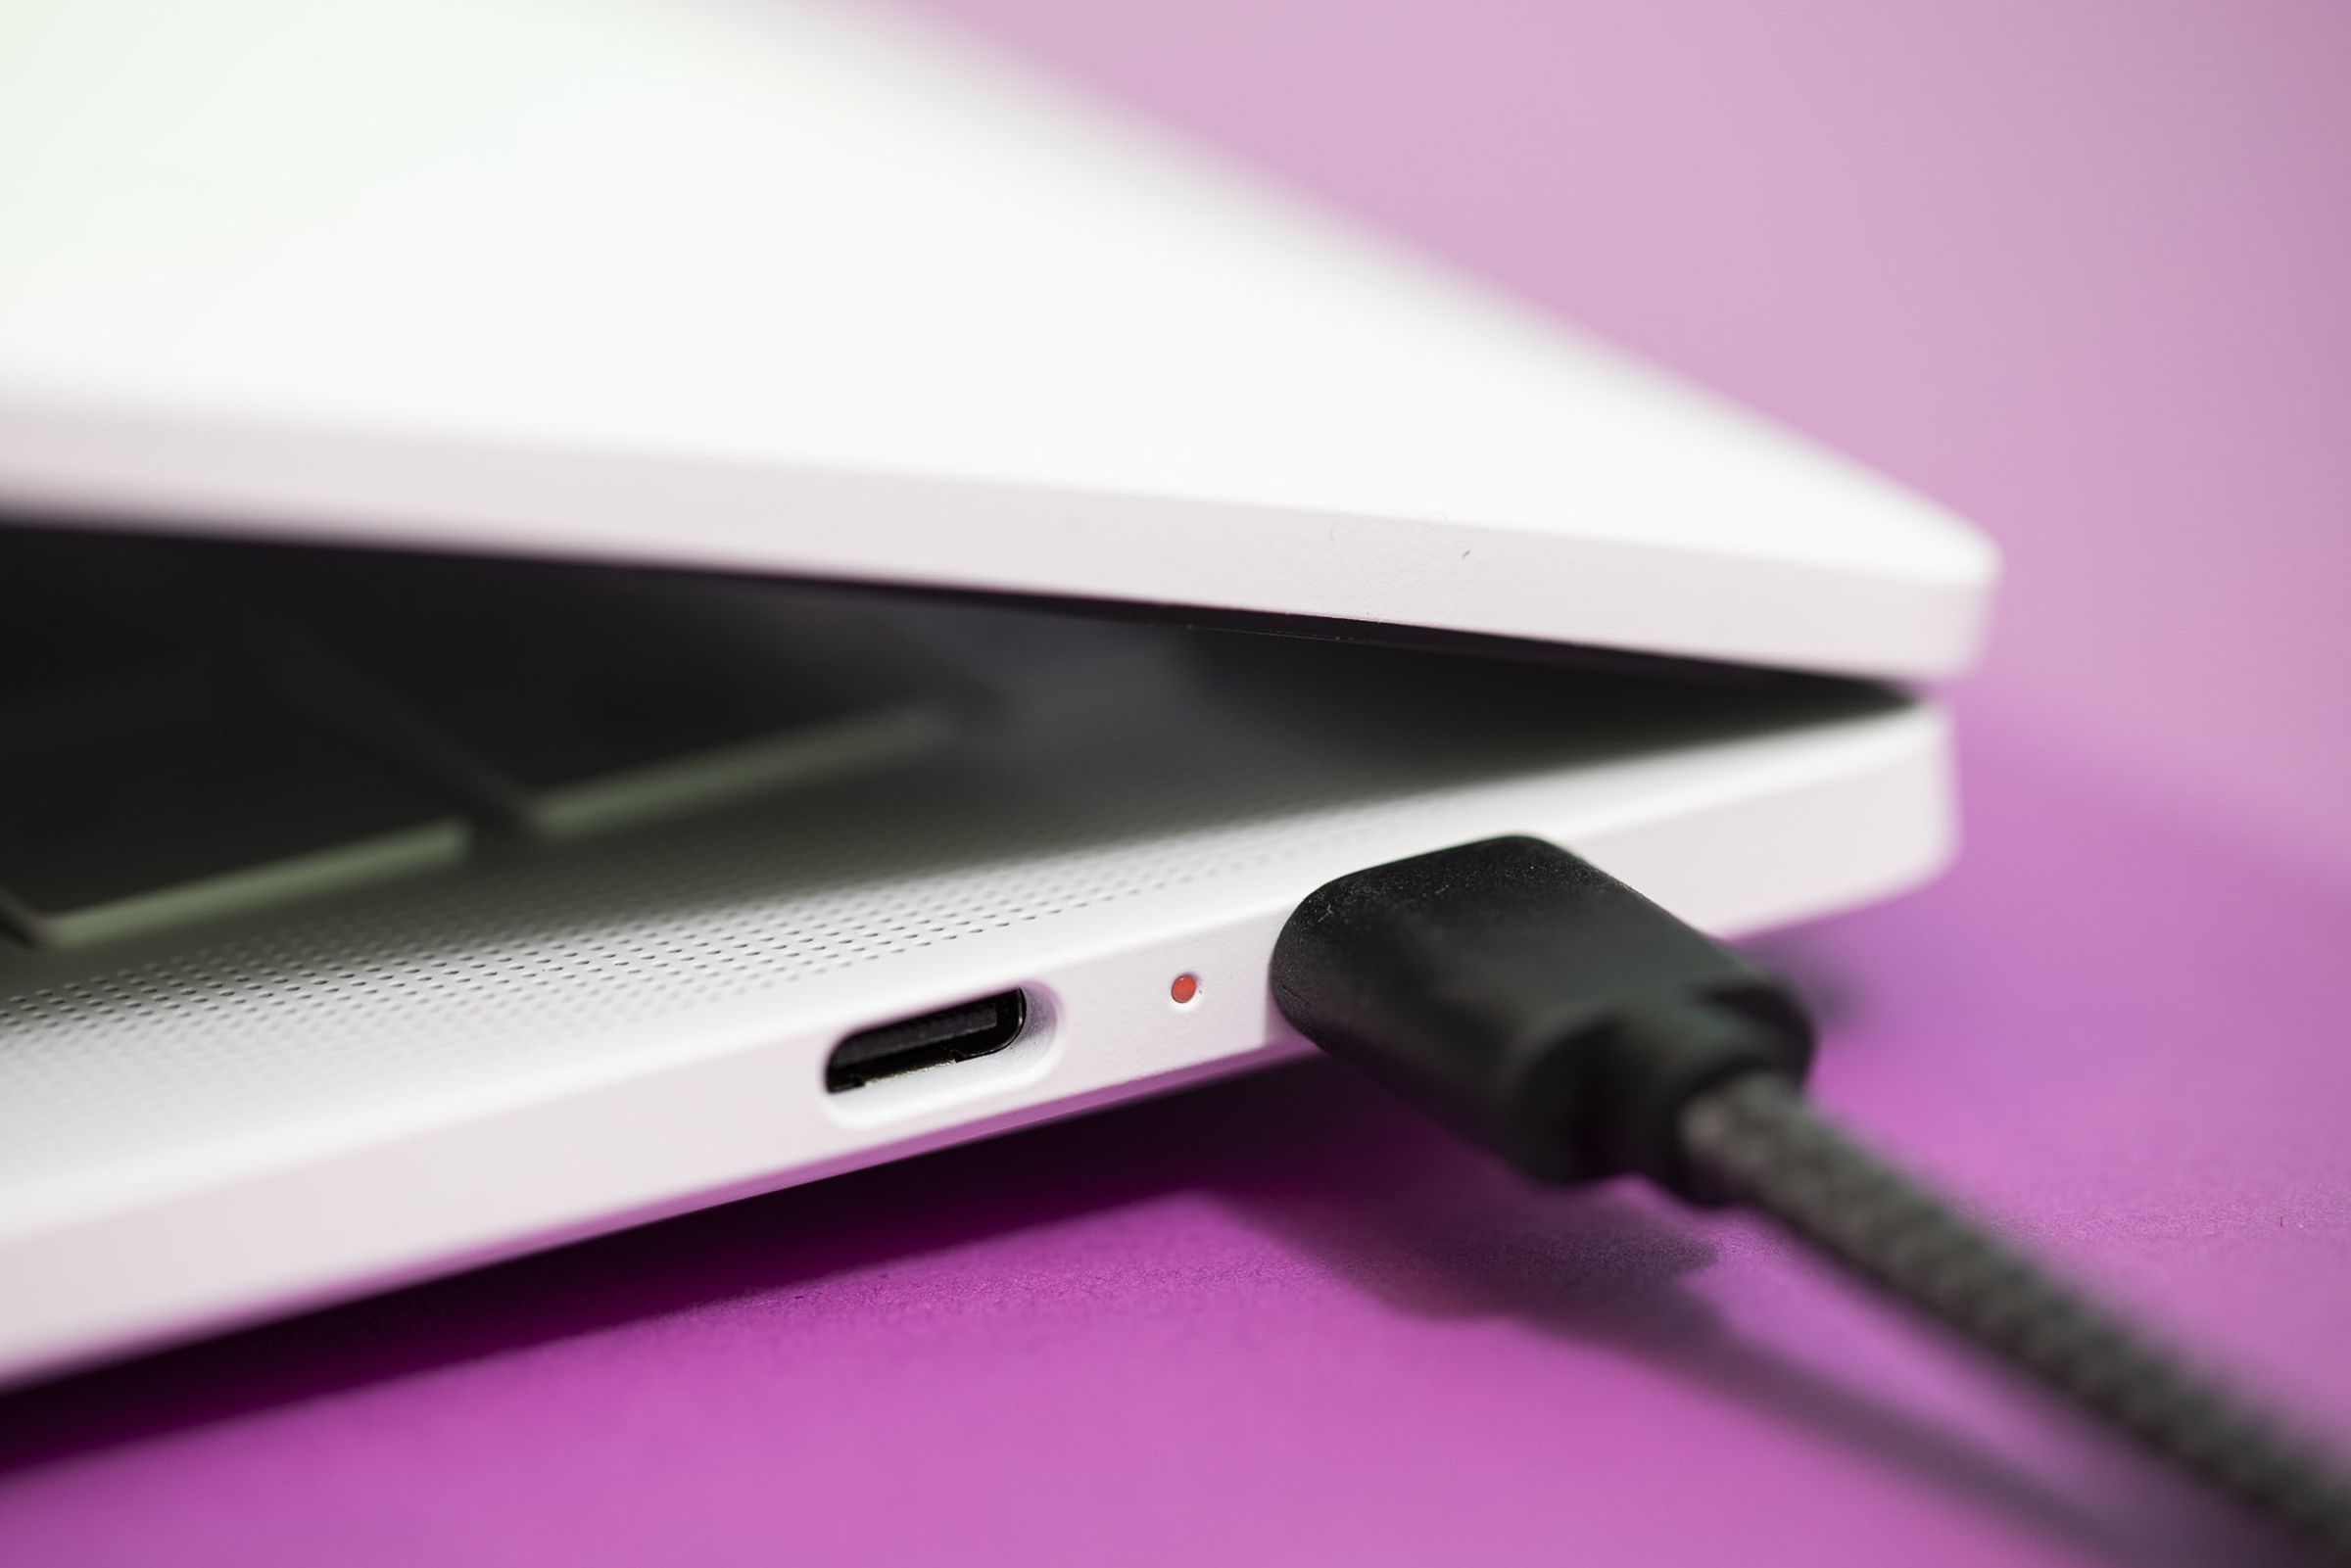 A charger plugged into the HP Dragonfly Pro Chromebook.